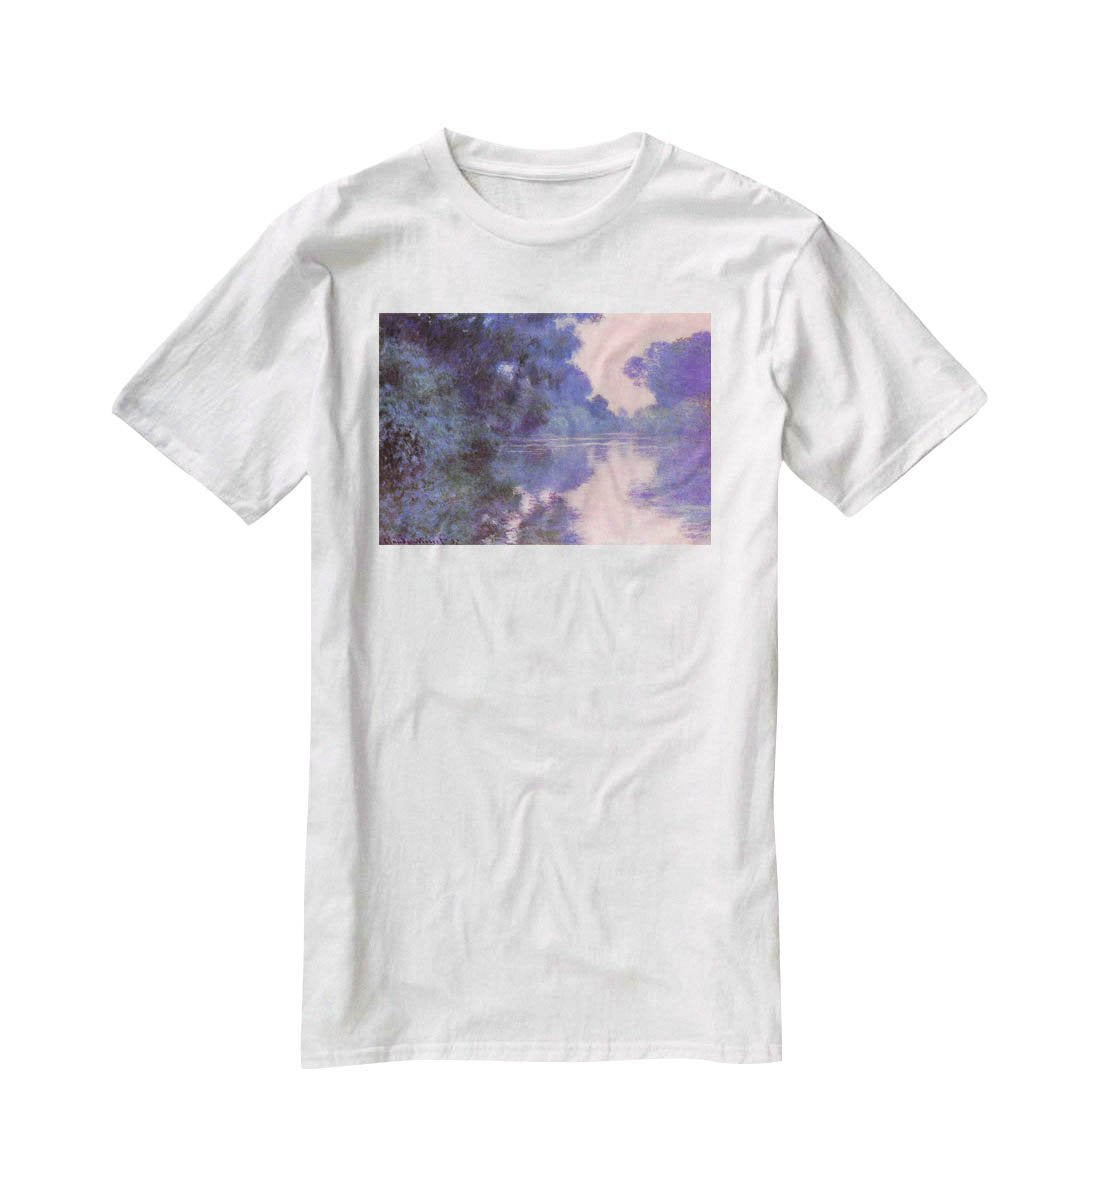 Seine arm at Giverny by Monet T-Shirt - Canvas Art Rocks - 5